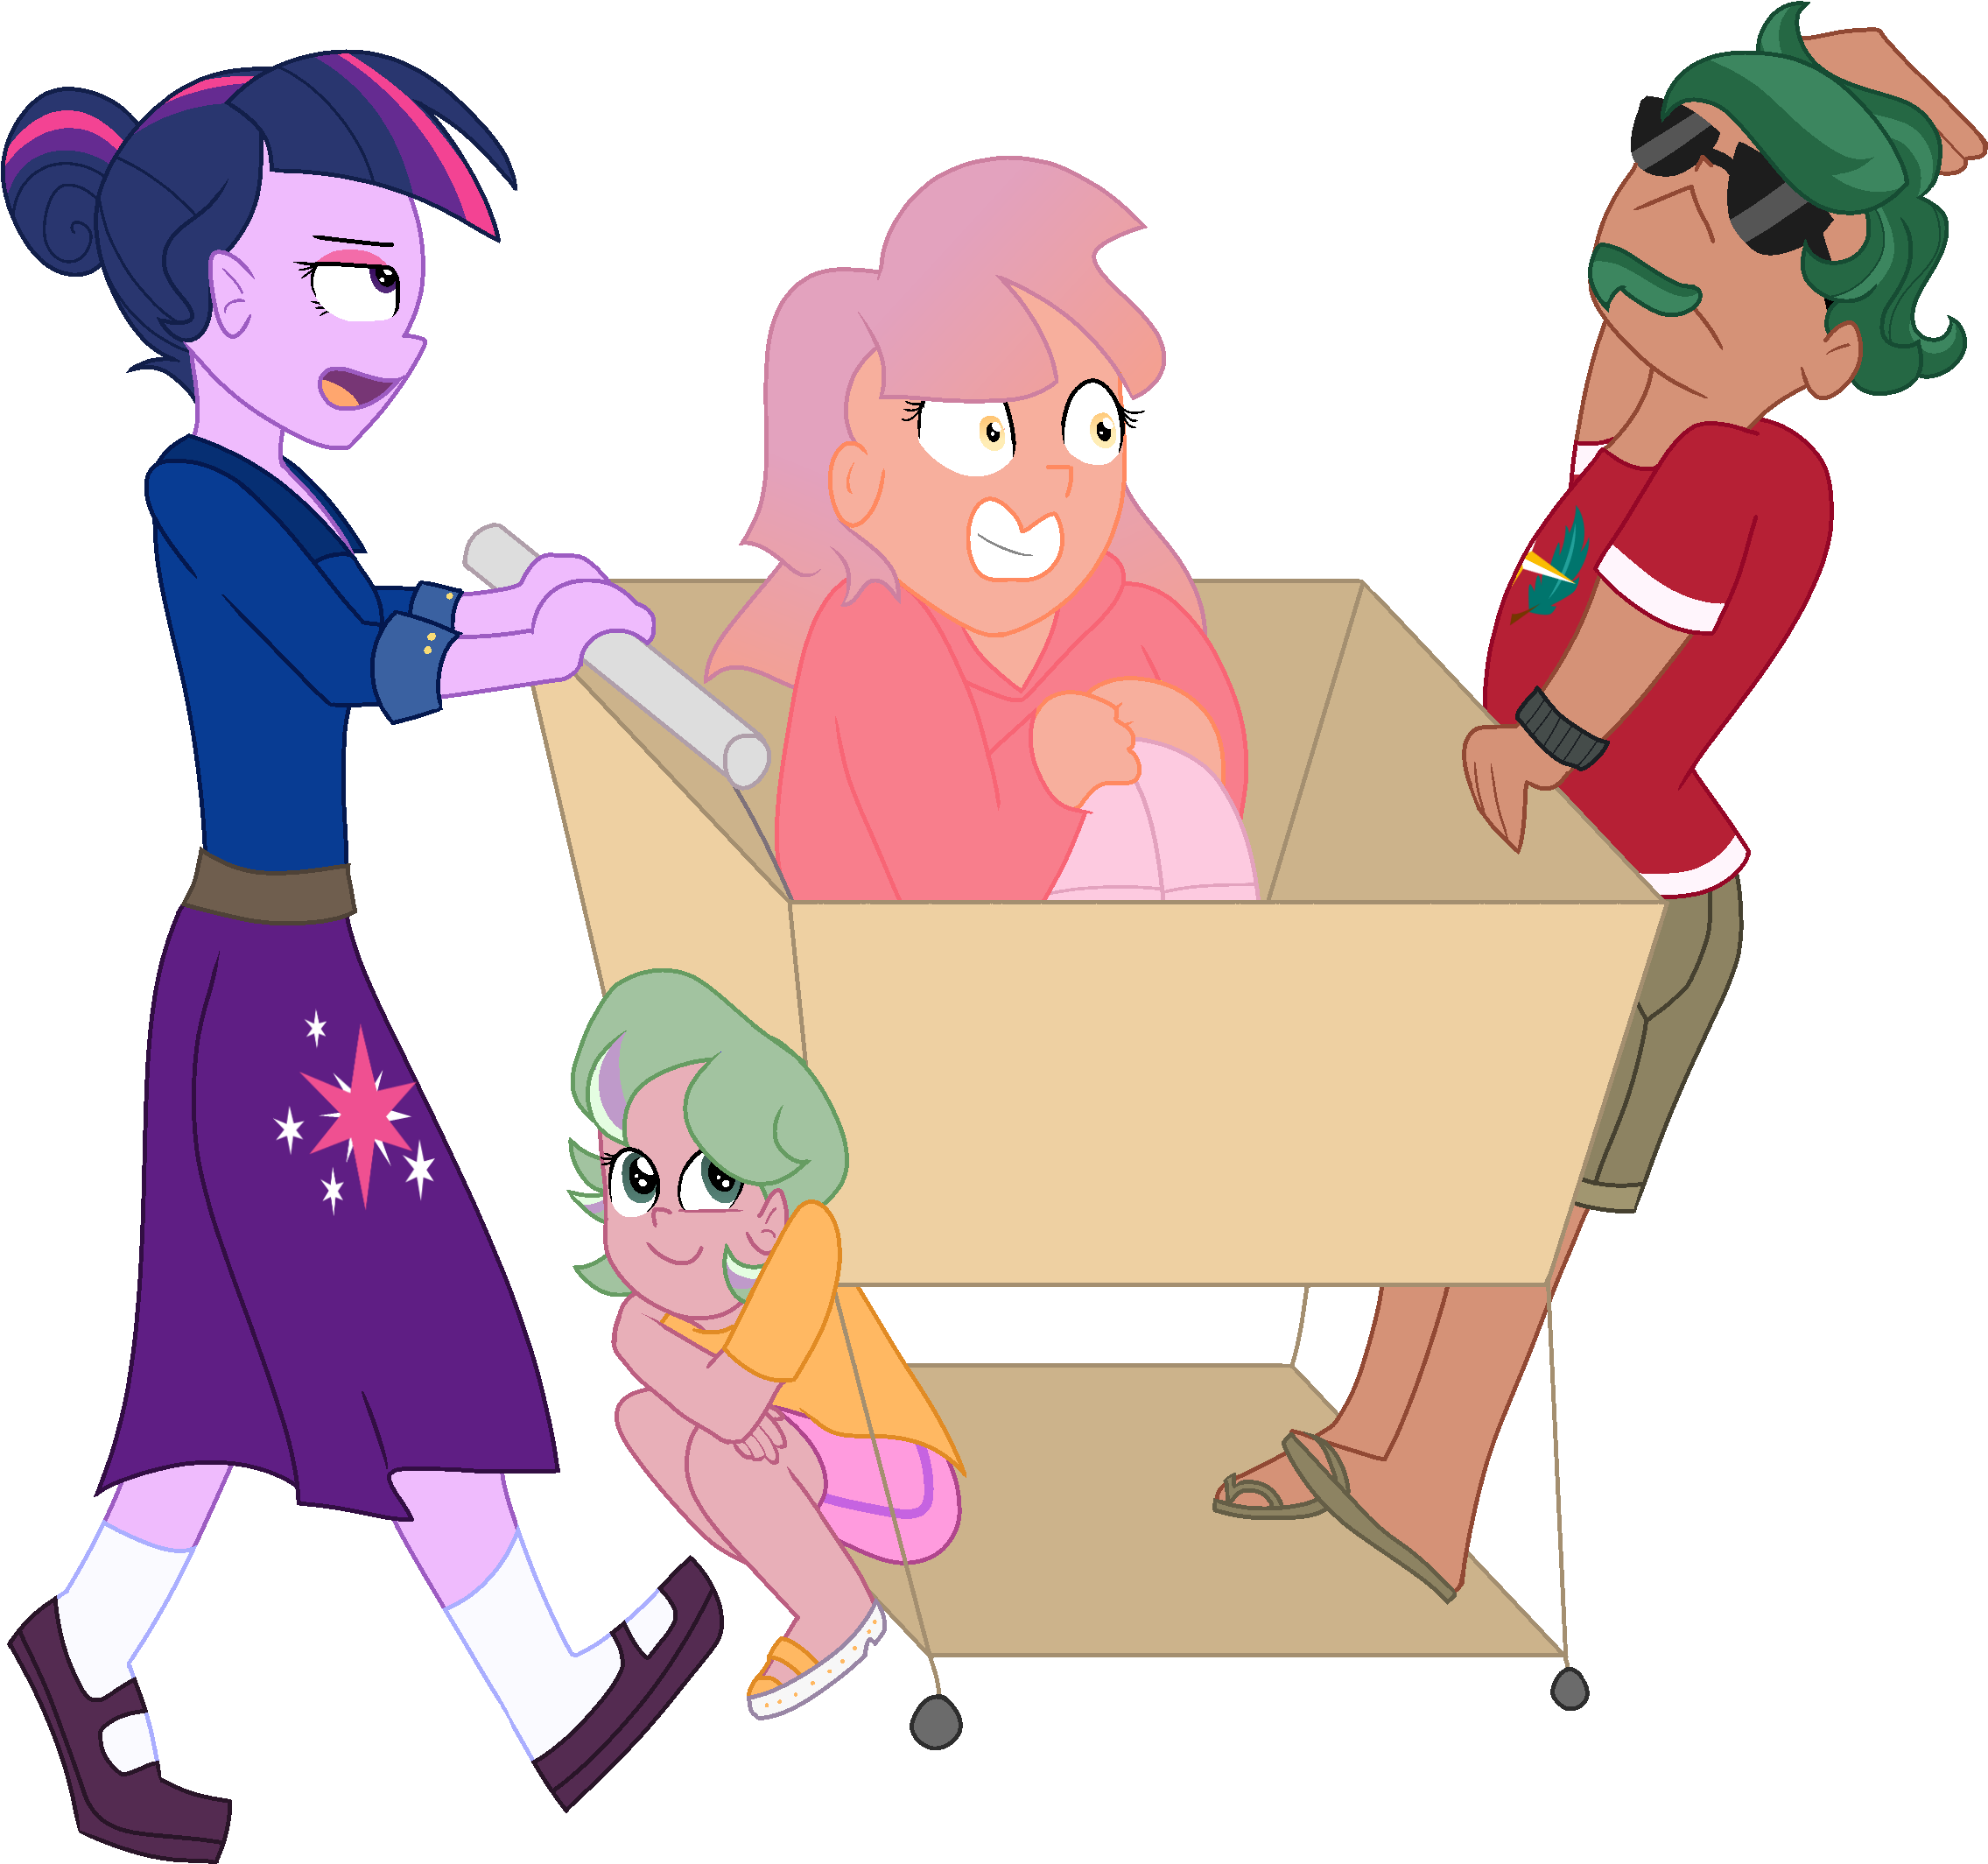 Family Shopping Trip By Berrypunchrules - Fan Art (2437x2203)